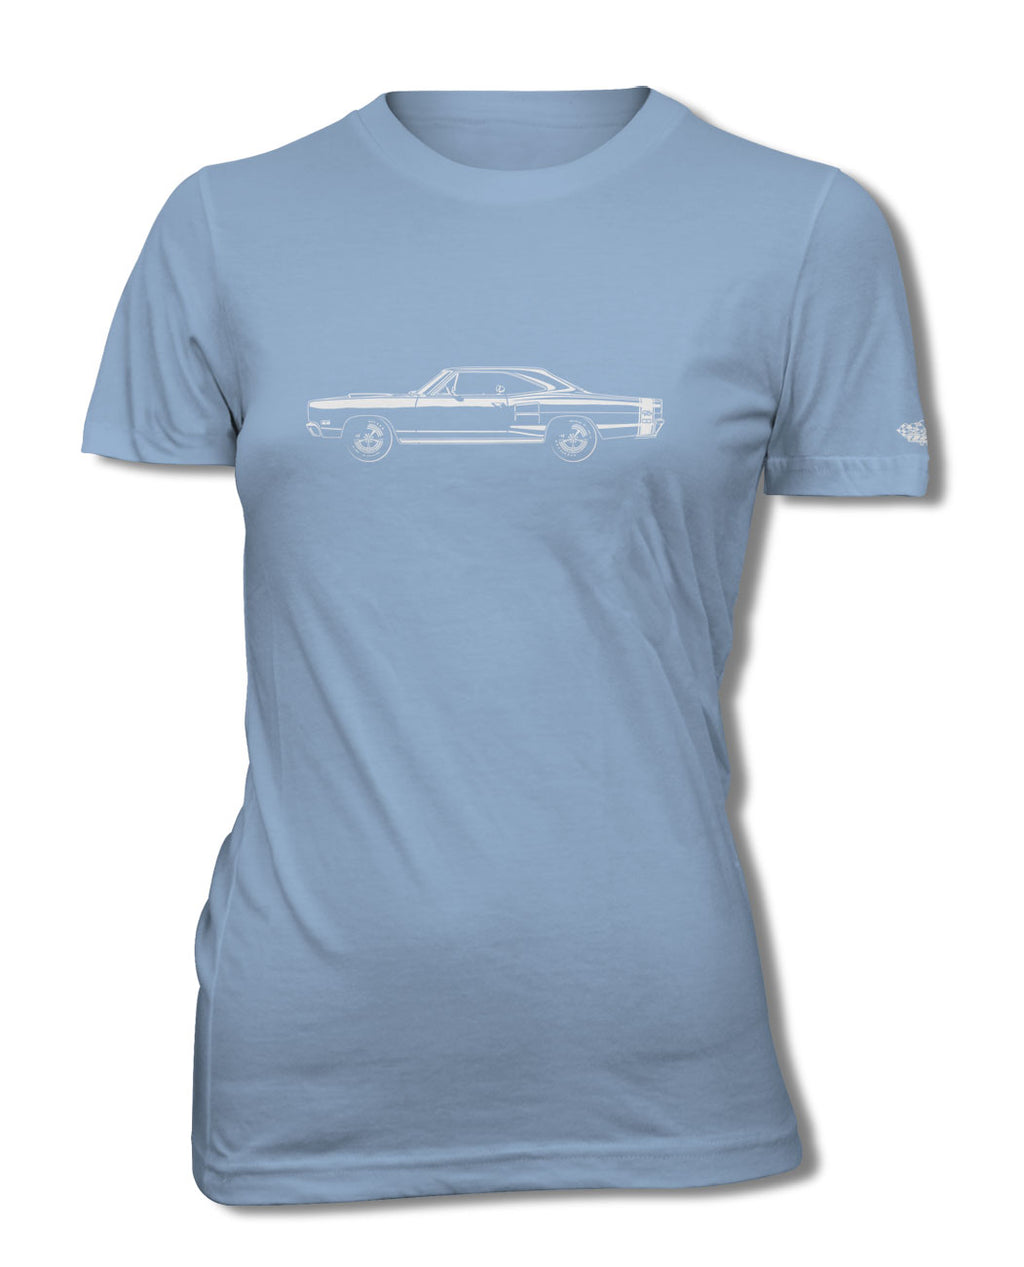 1969 Dodge Coronet RT Coupe with Stripes T-Shirt - Women - Side View